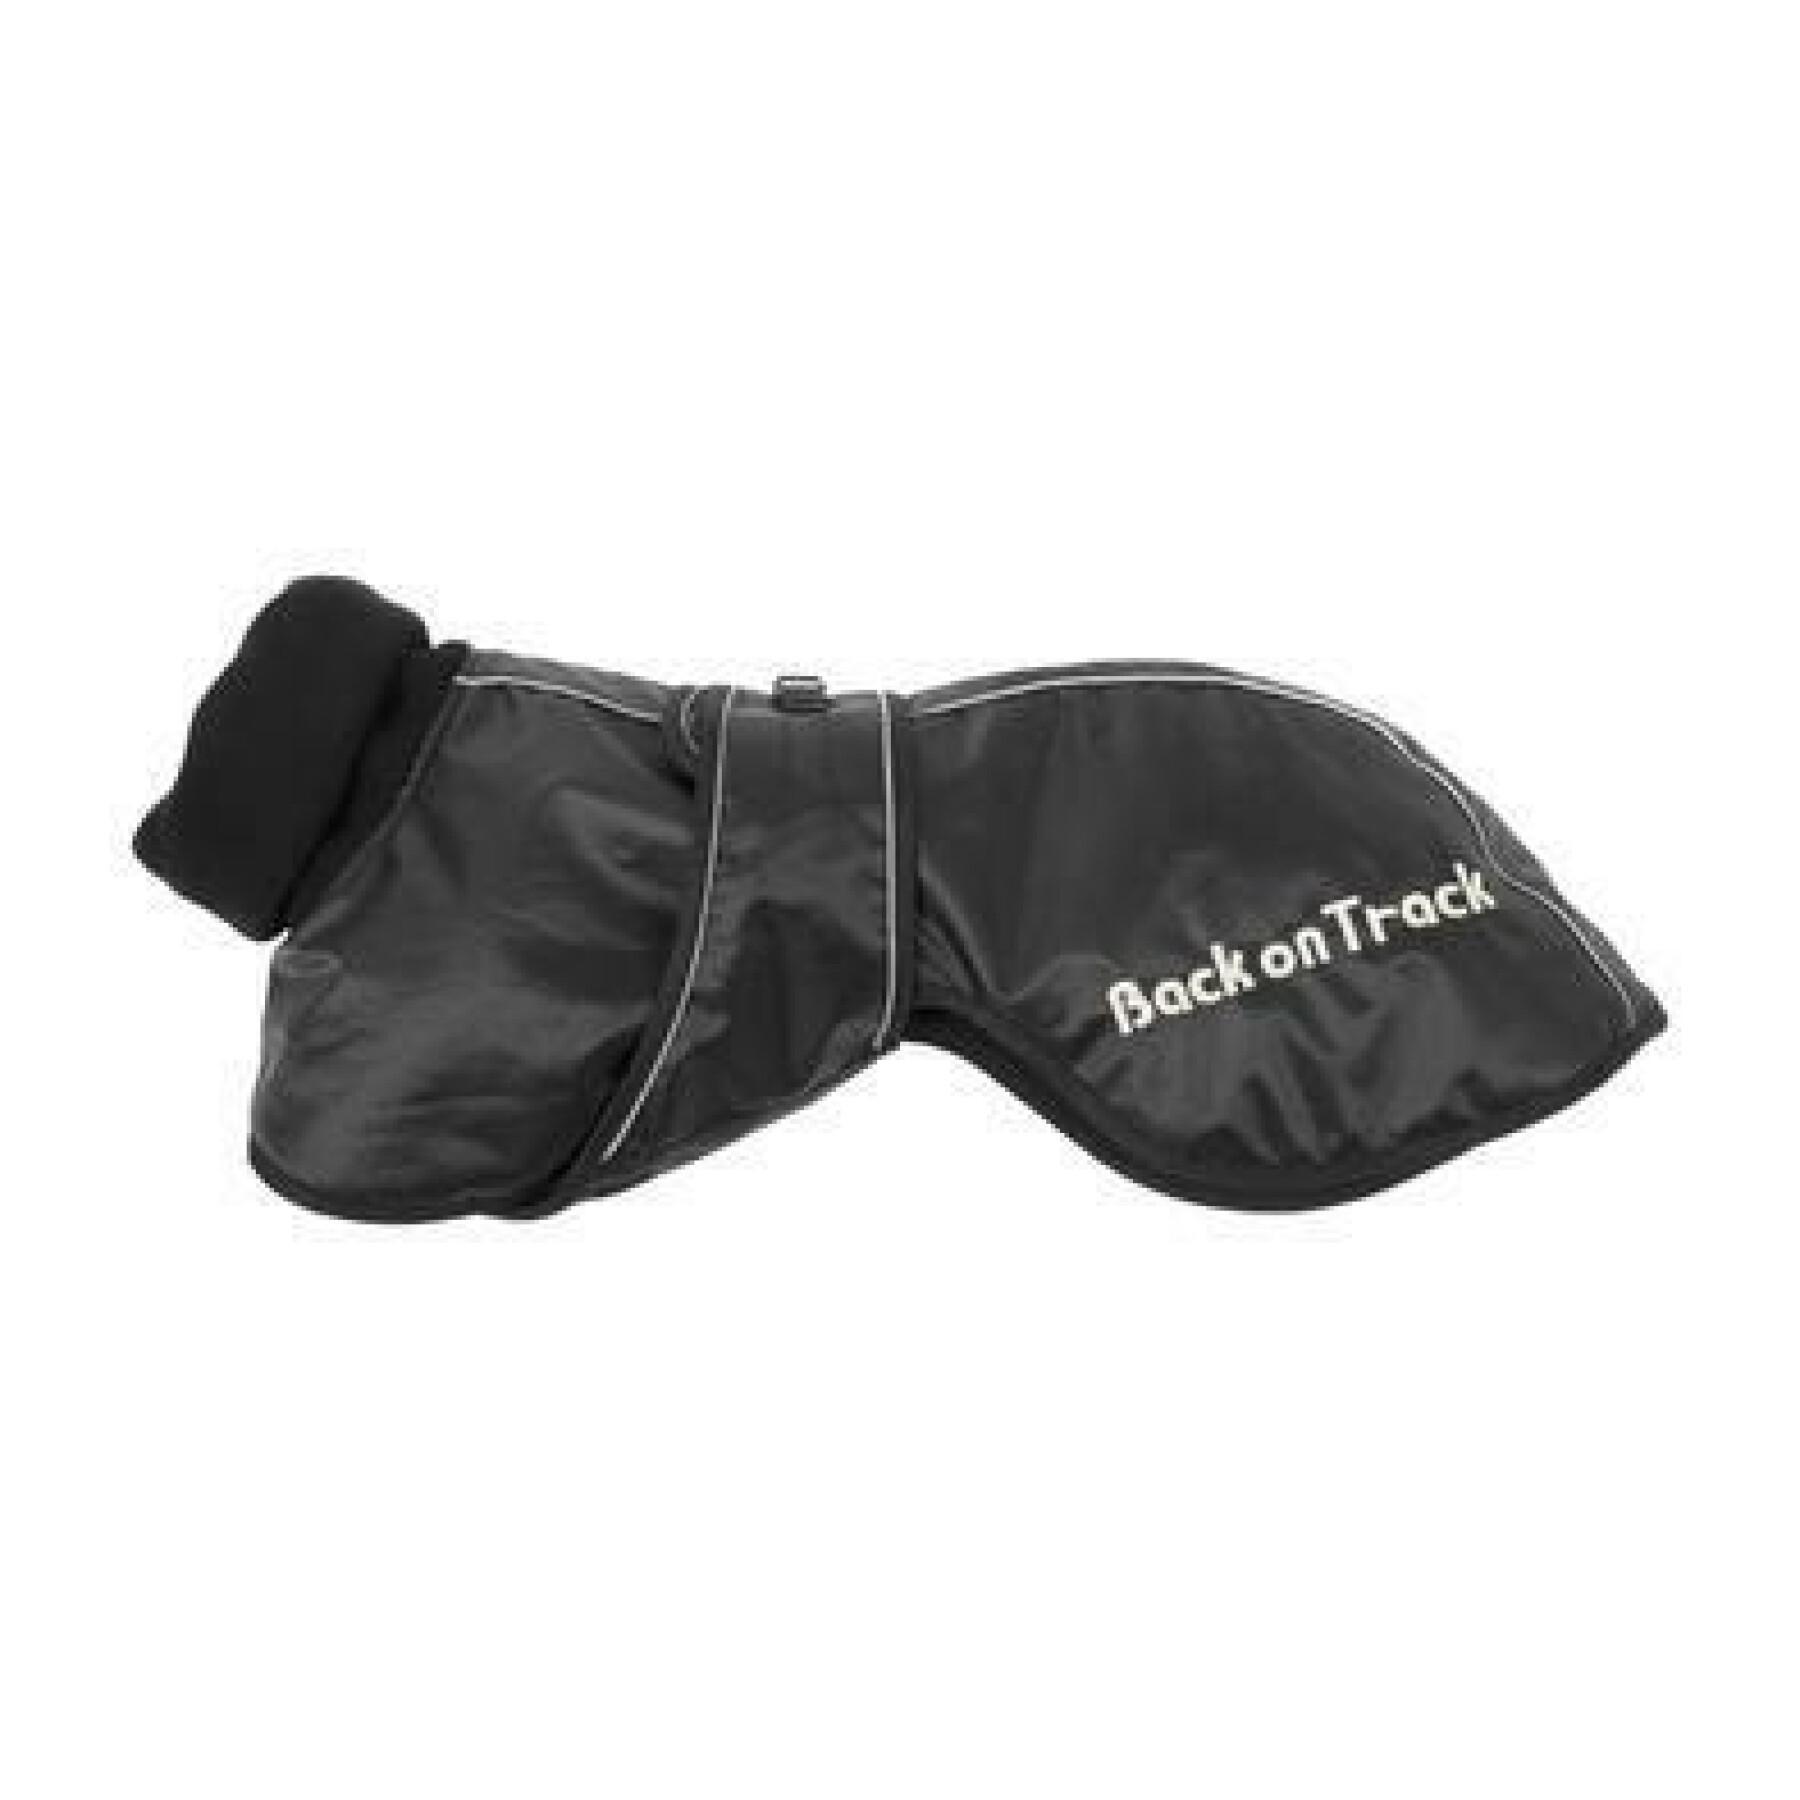 Cappottino per cani Back on Track whippet 55 cm